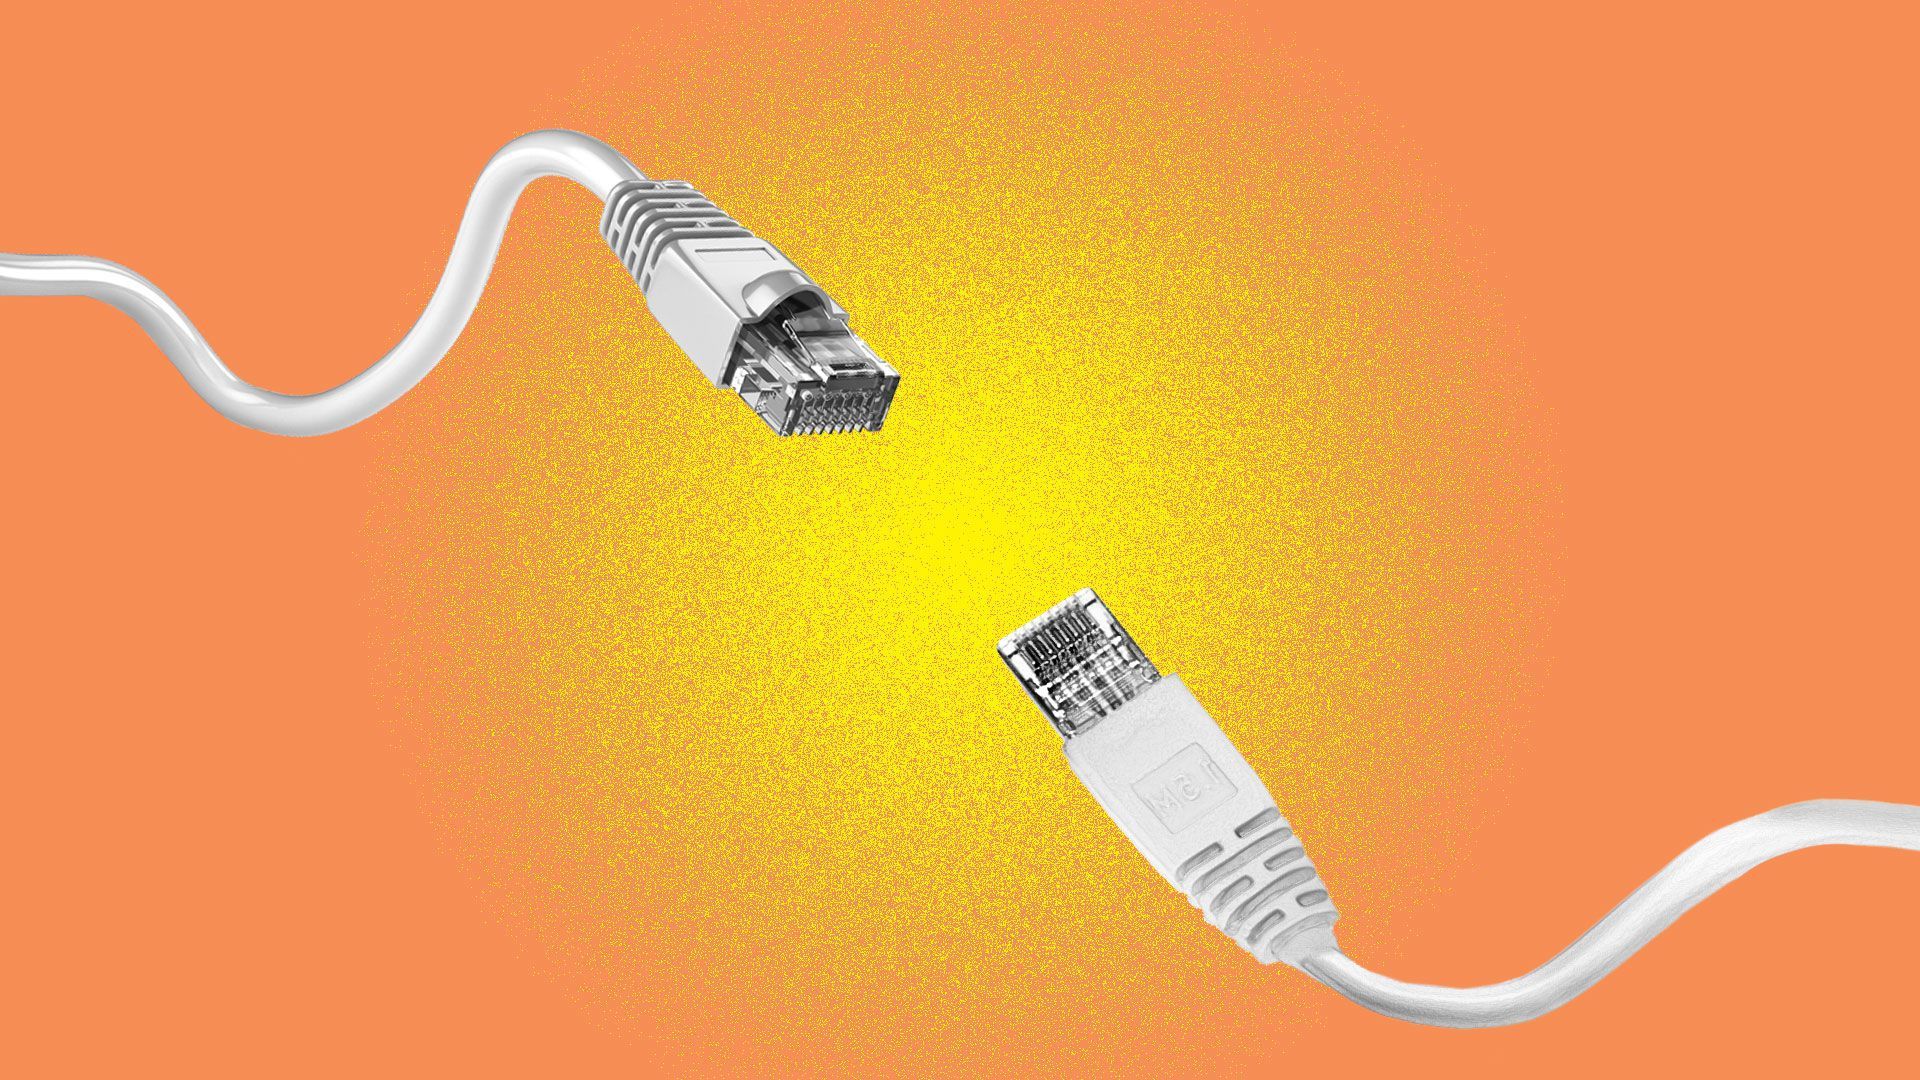 A pair of Ethernet plugs signifying Internet connections